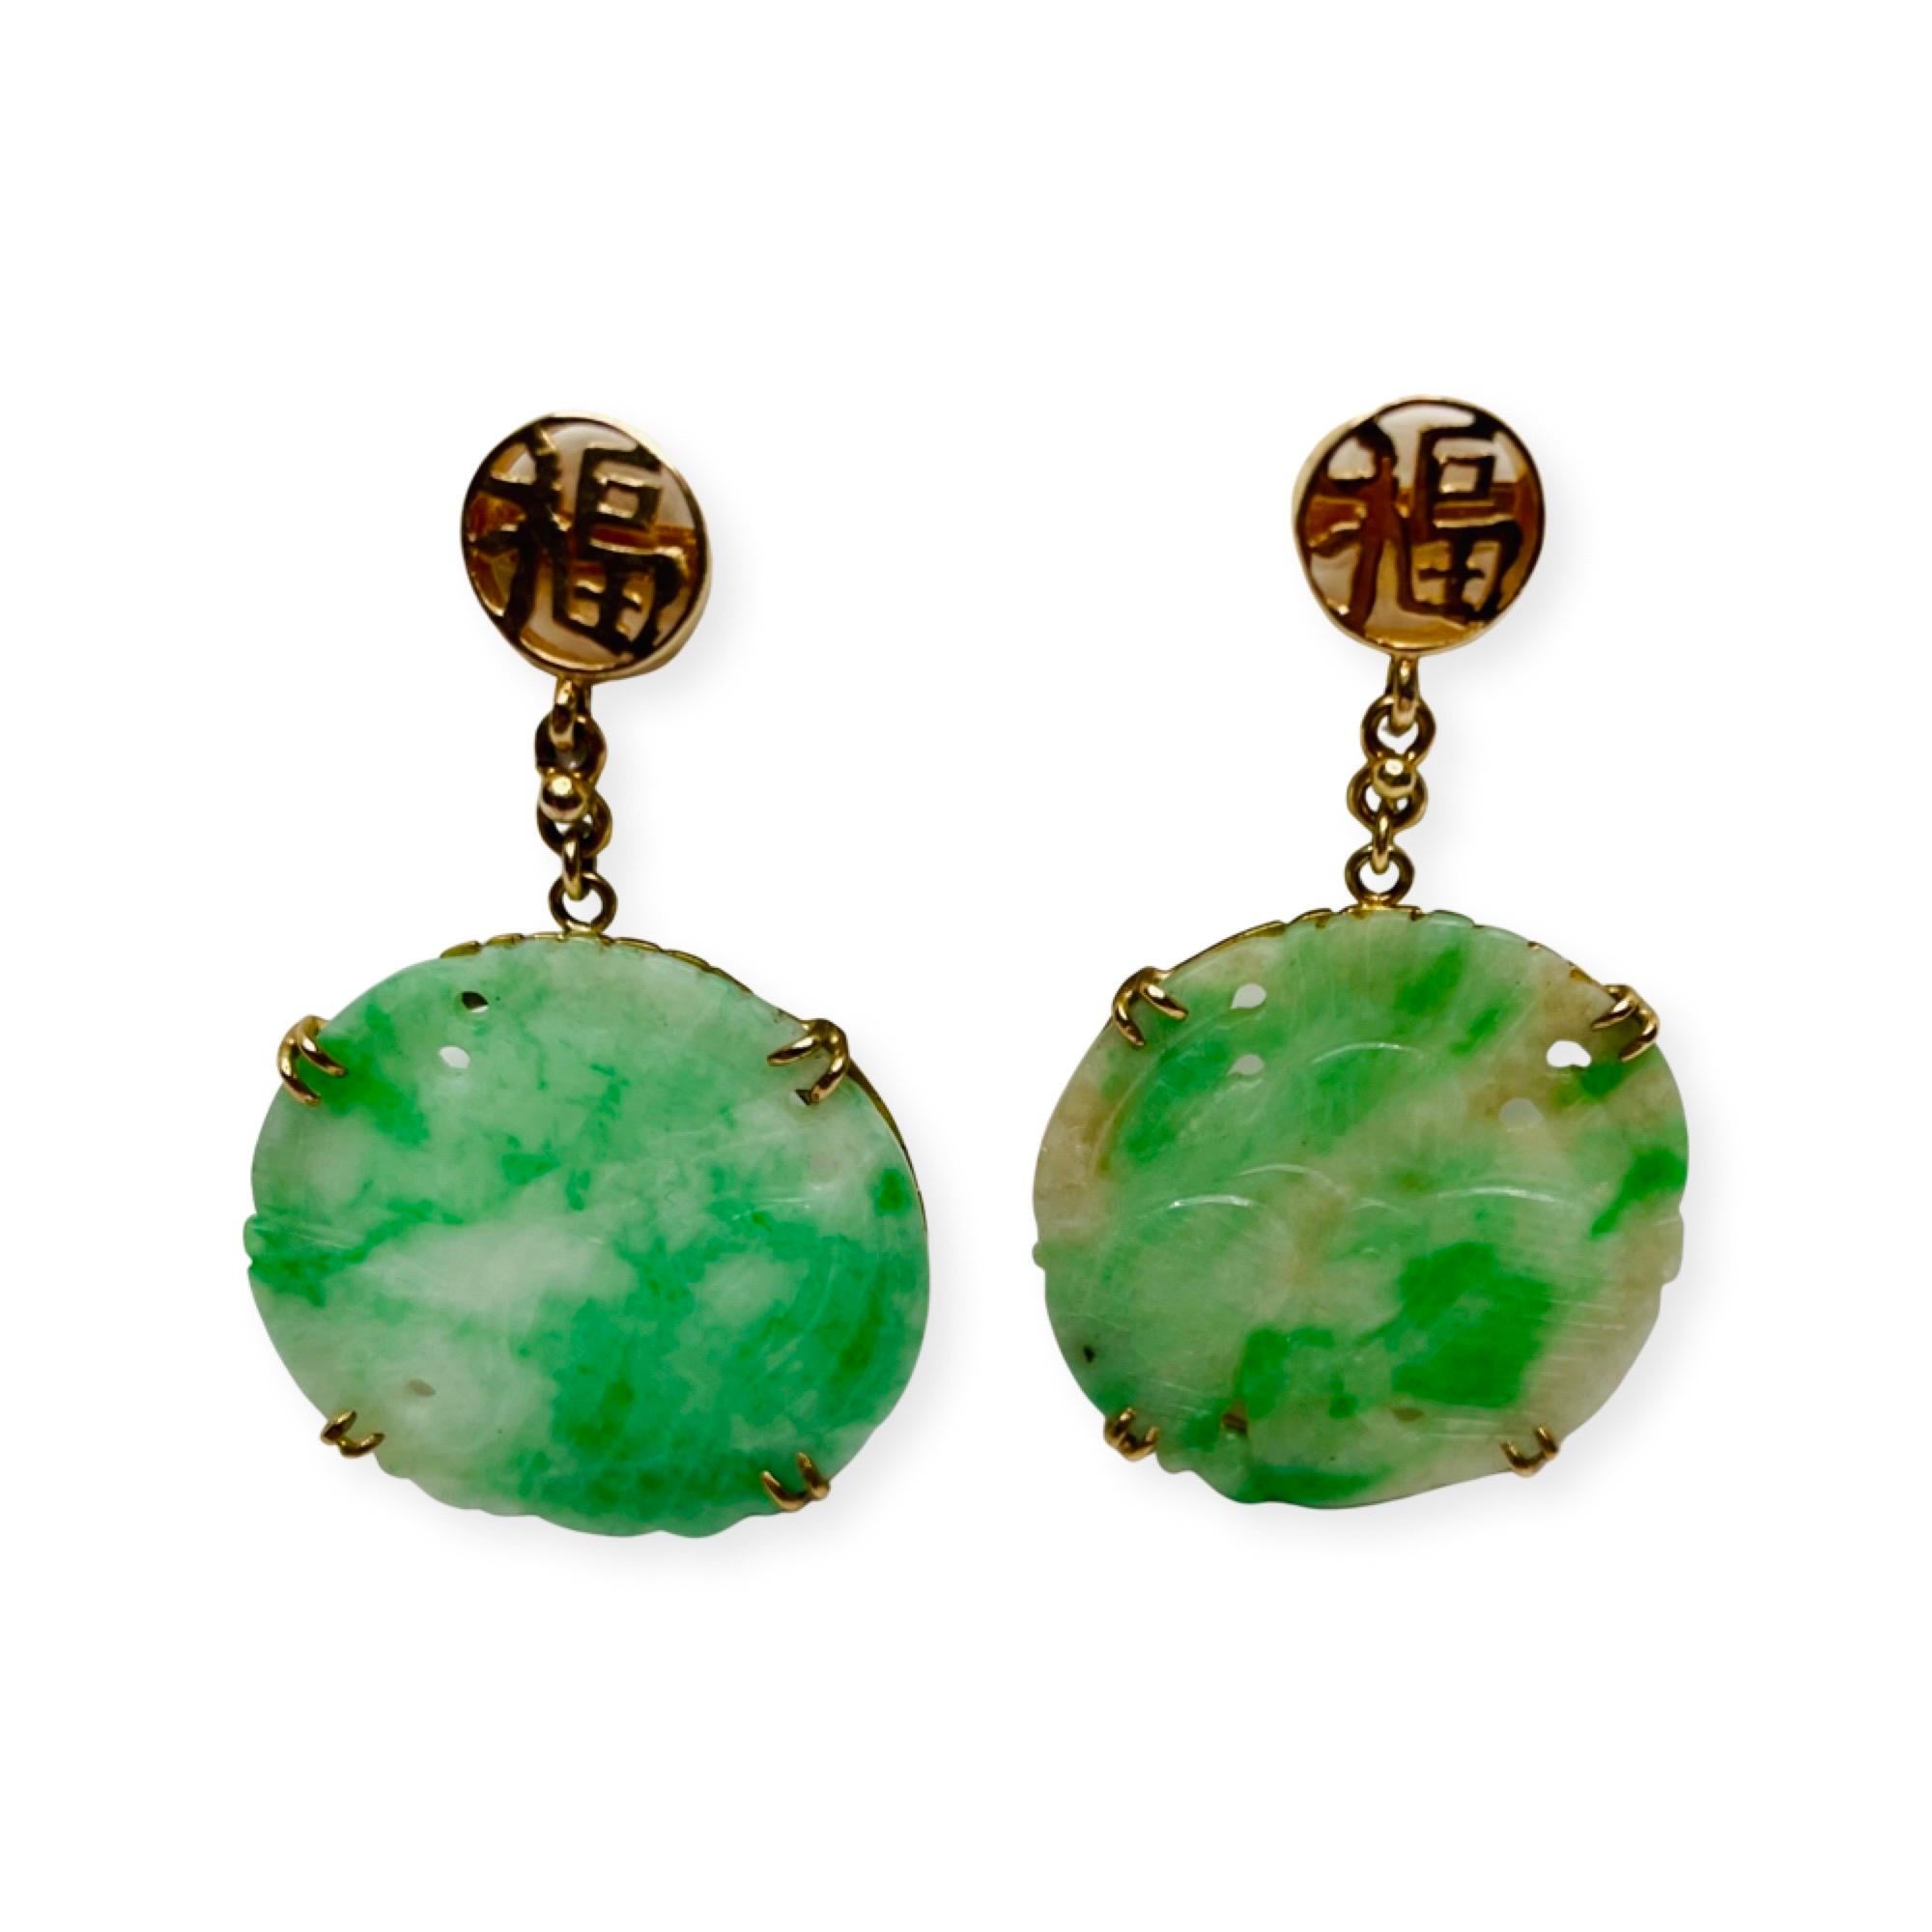 Mason Kay 14K Yellow Gold Natural Carved Green Jadeite Earrings. The carved antique, untreated jadeite discs measure 22.3 mm. They have a bird motive. They are set in 14K yellow gold frames and set with 4 double split prongs. The top of the jadeite